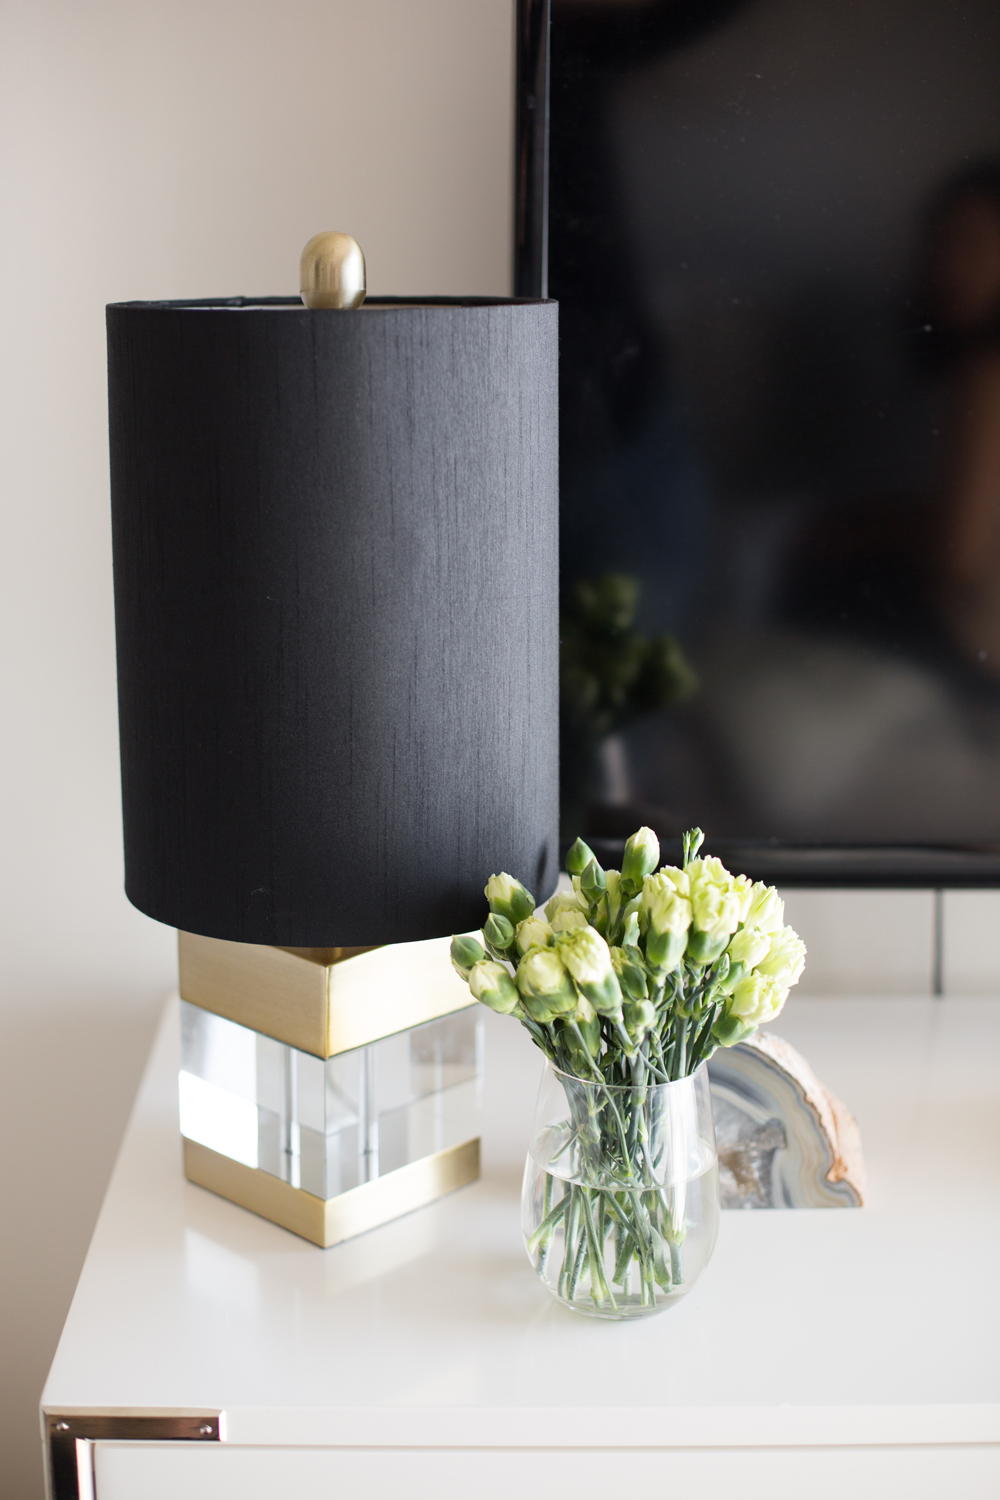 Black, gold and lucite lamp on dresser with small vase of carnations